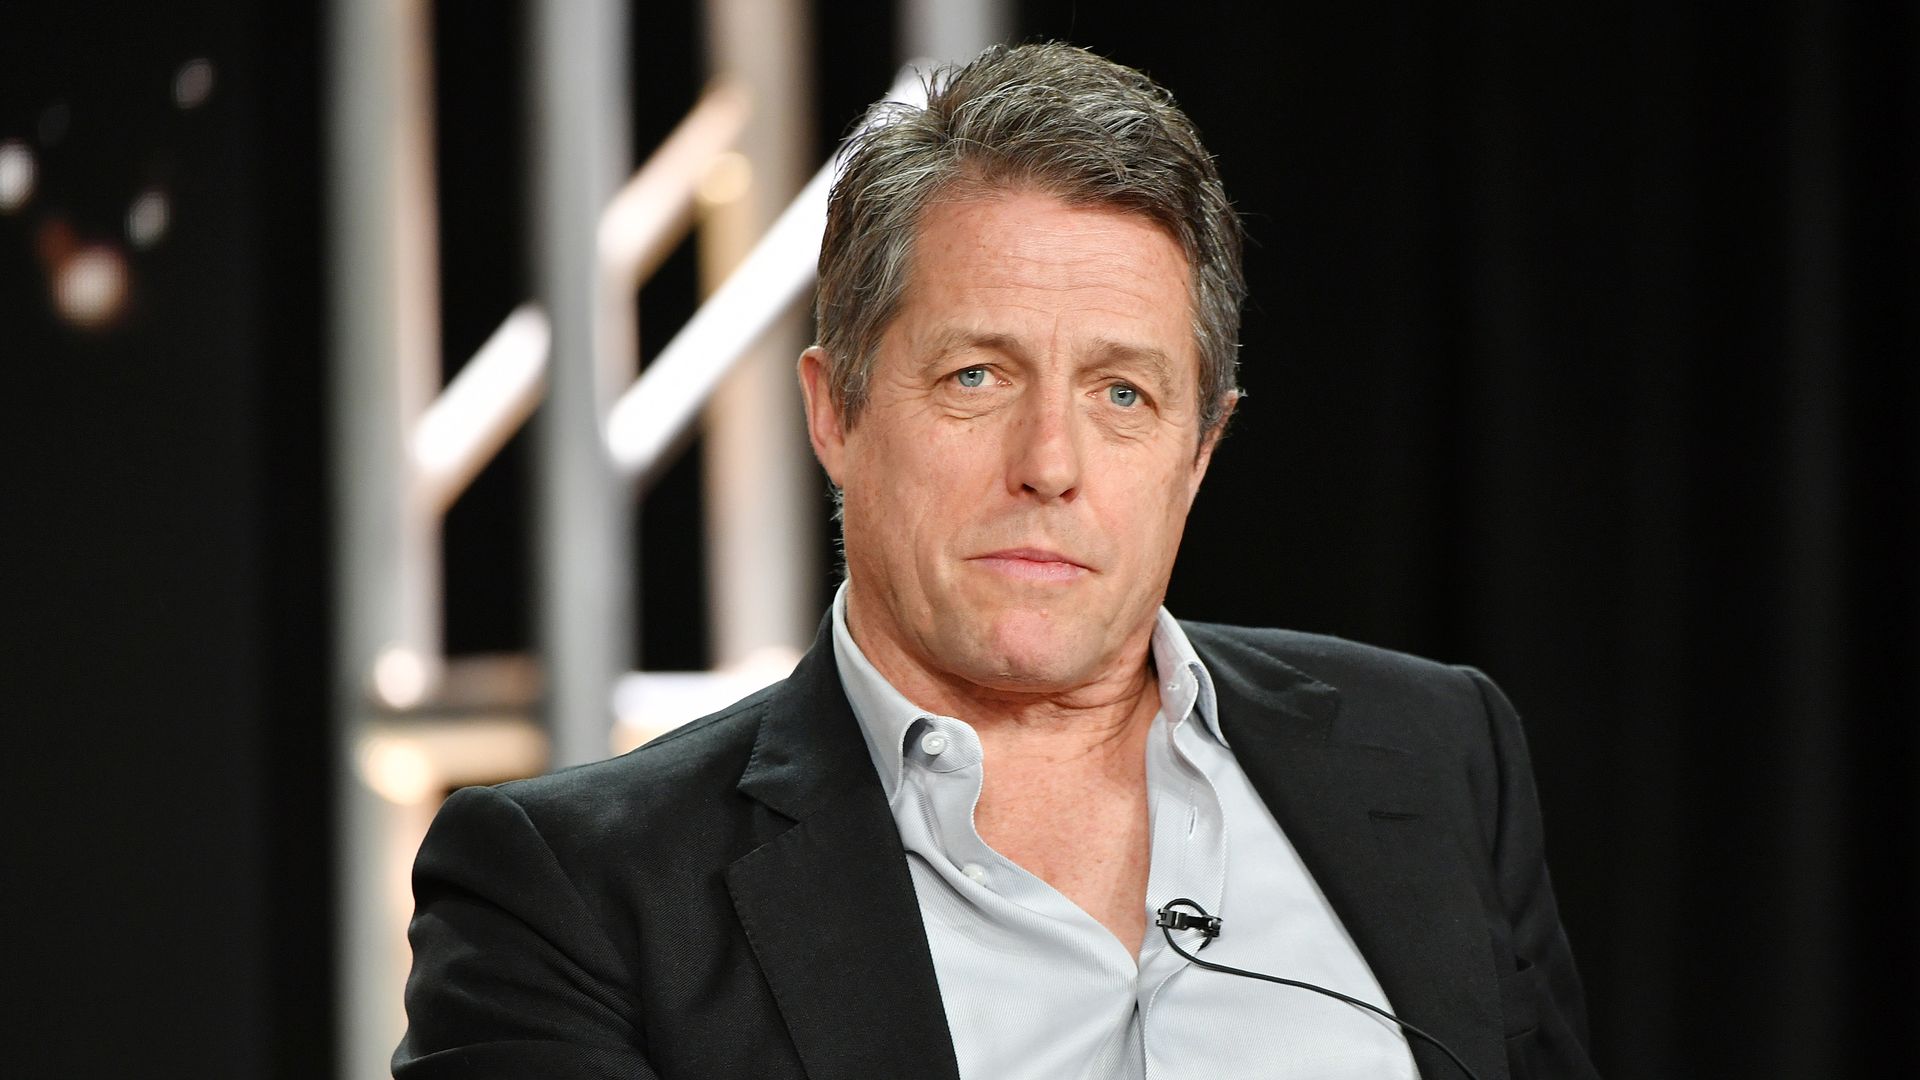 Hugh Grant of "The Undoing" speaks during the HBO segment of the 2020 Winter TCA Press Tour at The Langham Huntington, Pasadena on January 15, 2020 in Pasadena, California